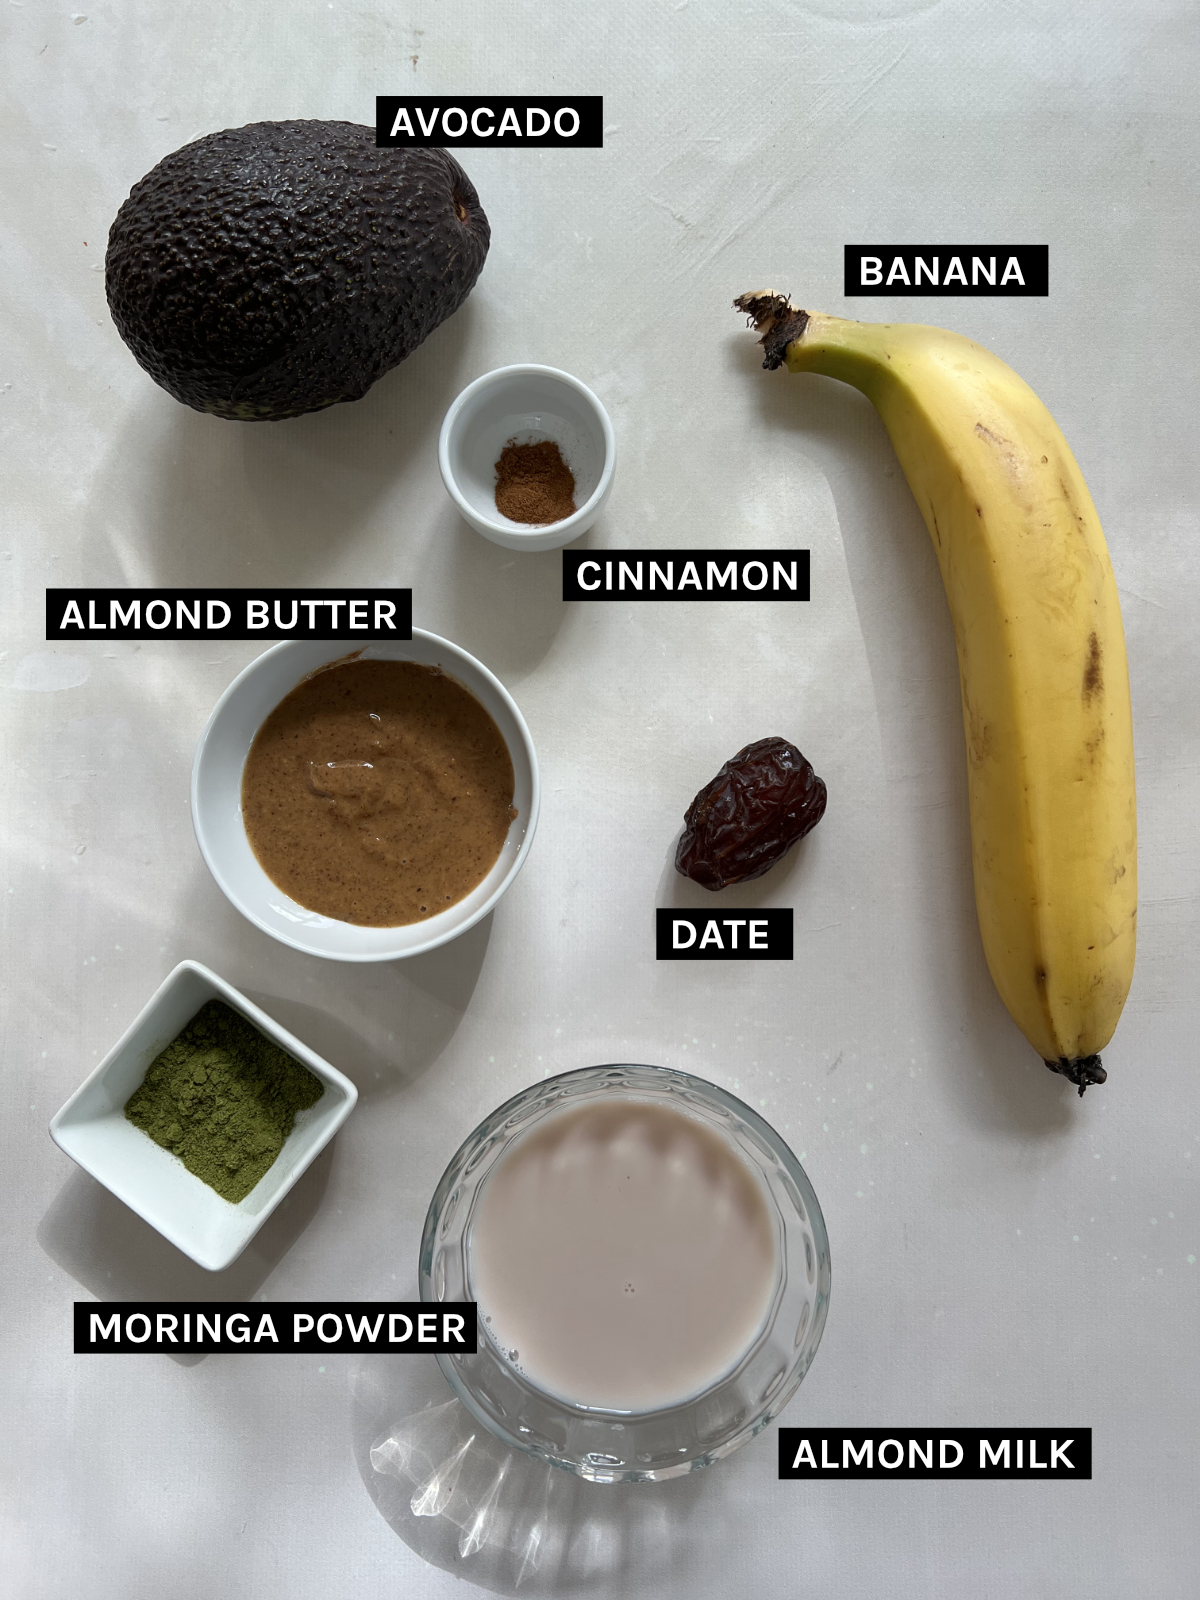 Ingredients laid out on a white benchtop